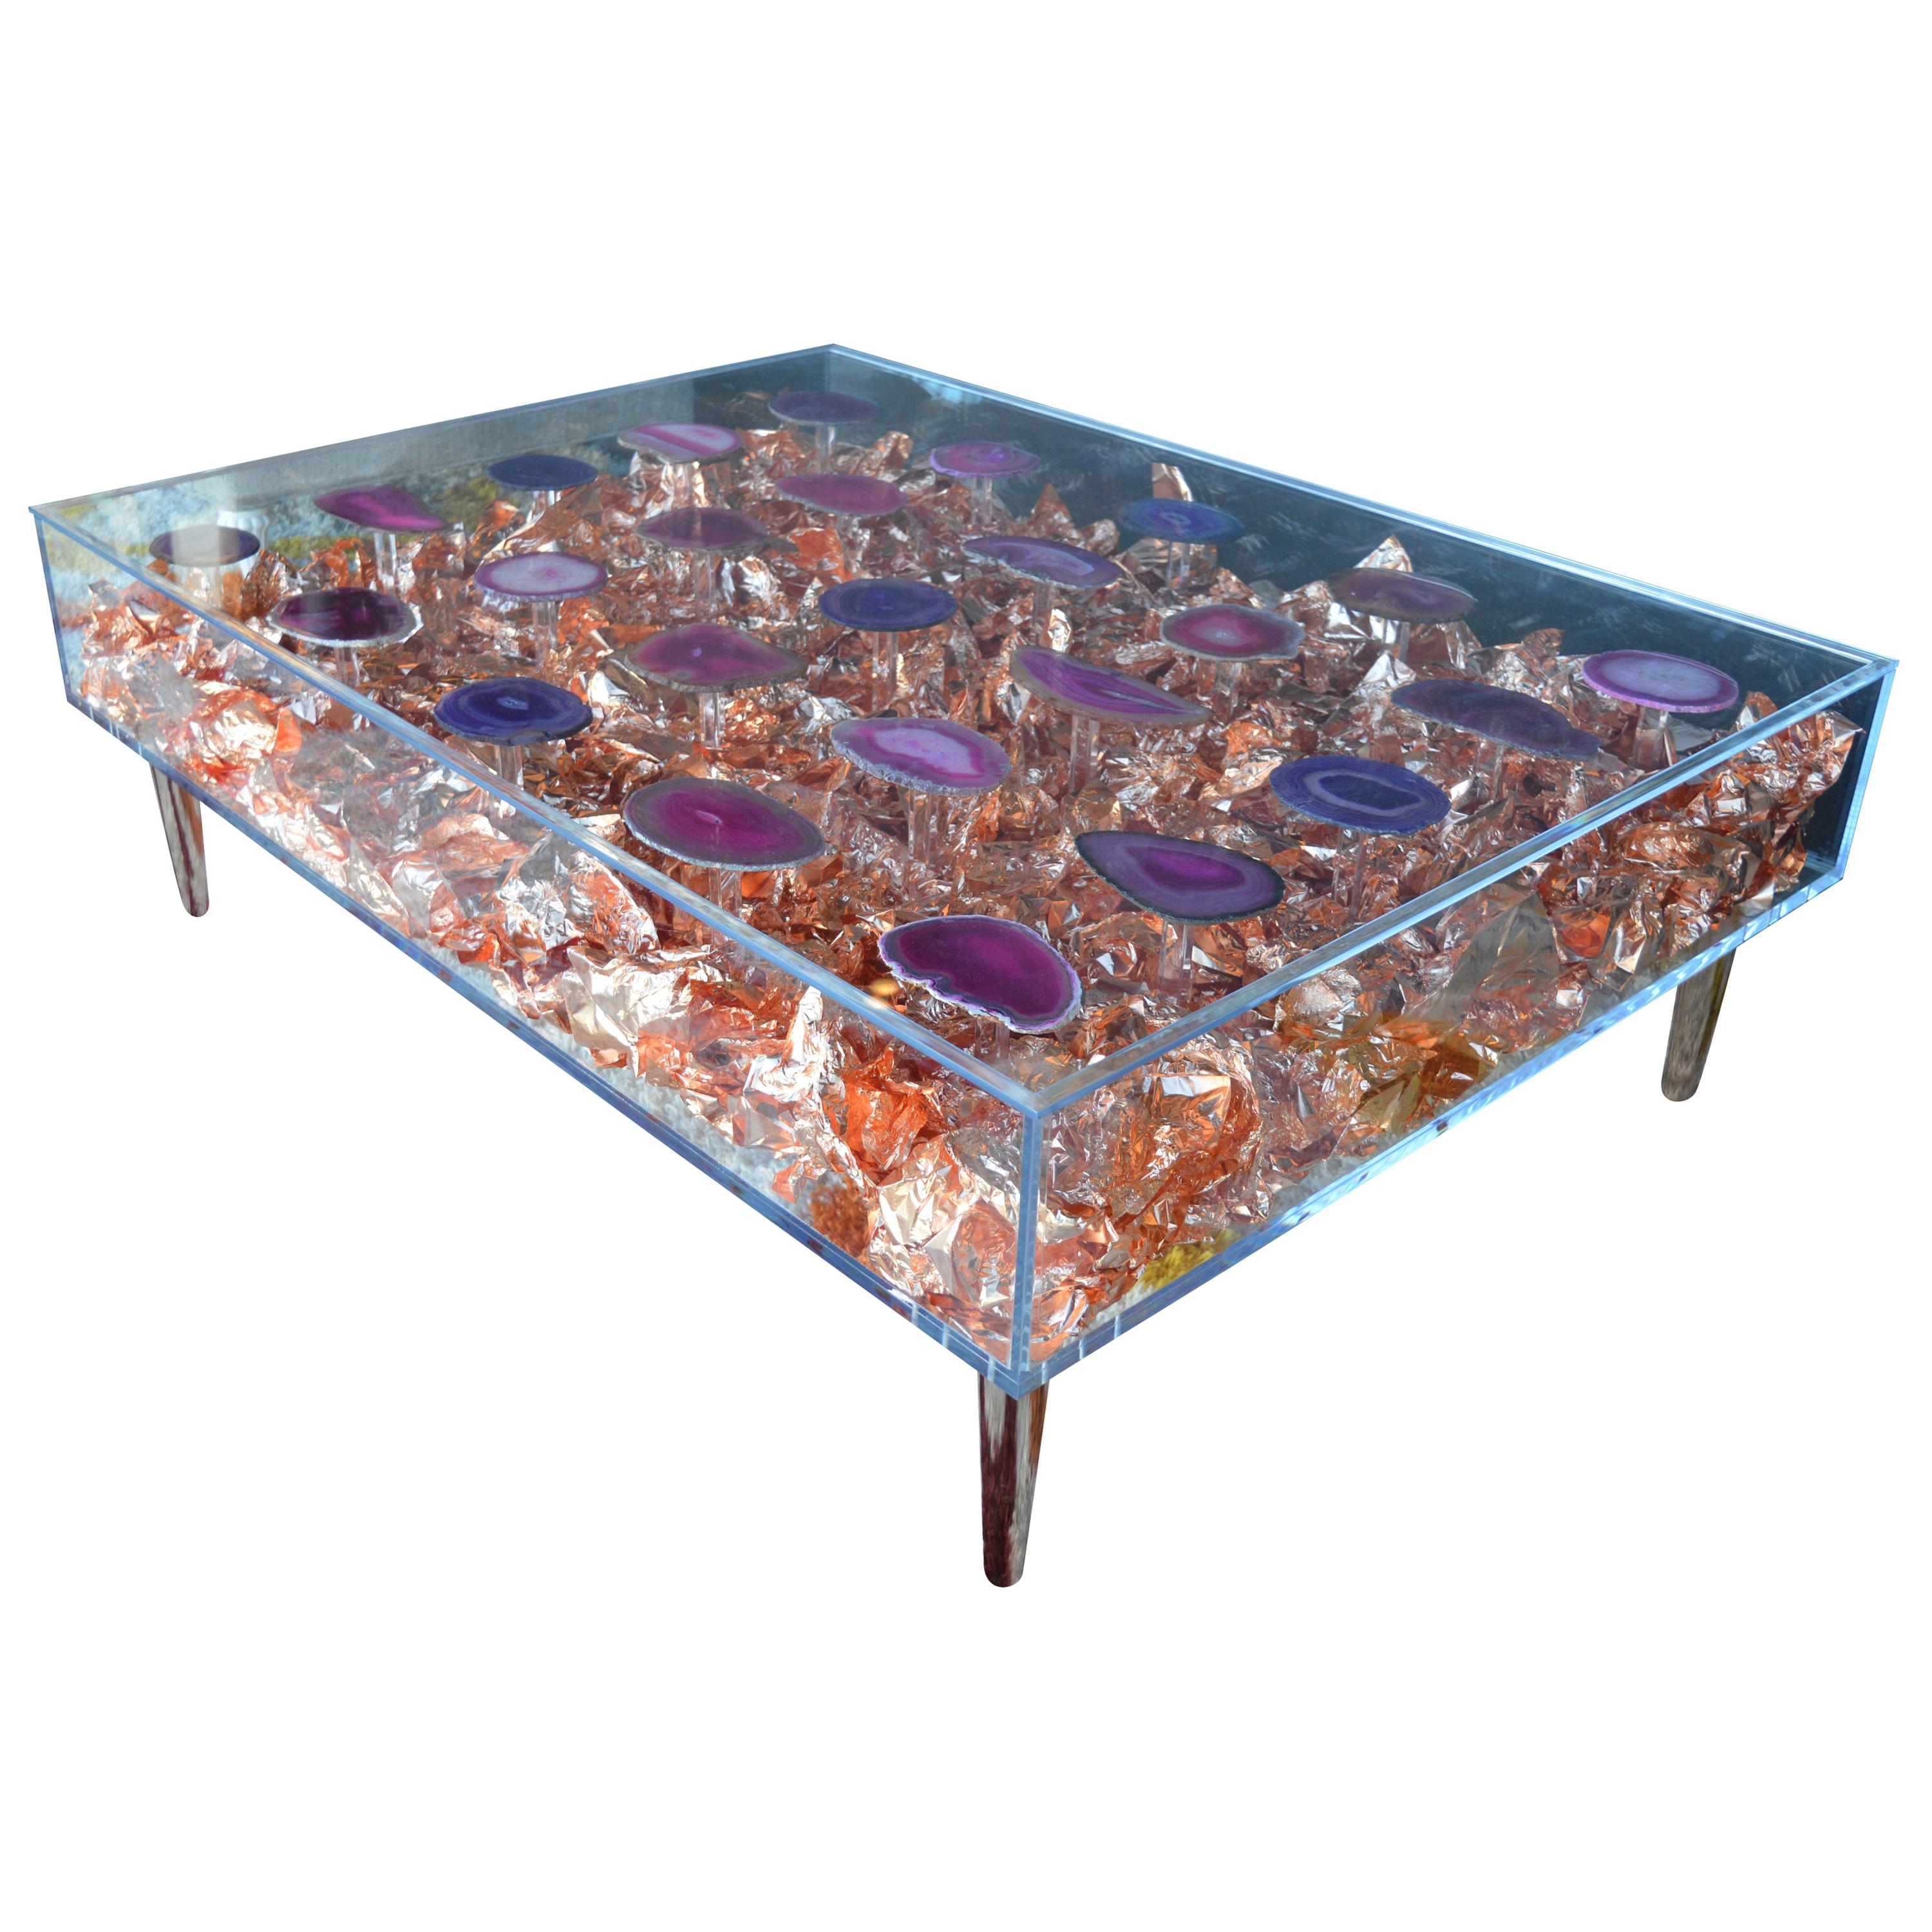 Modernist Coffee Table by Pegaso Gallery